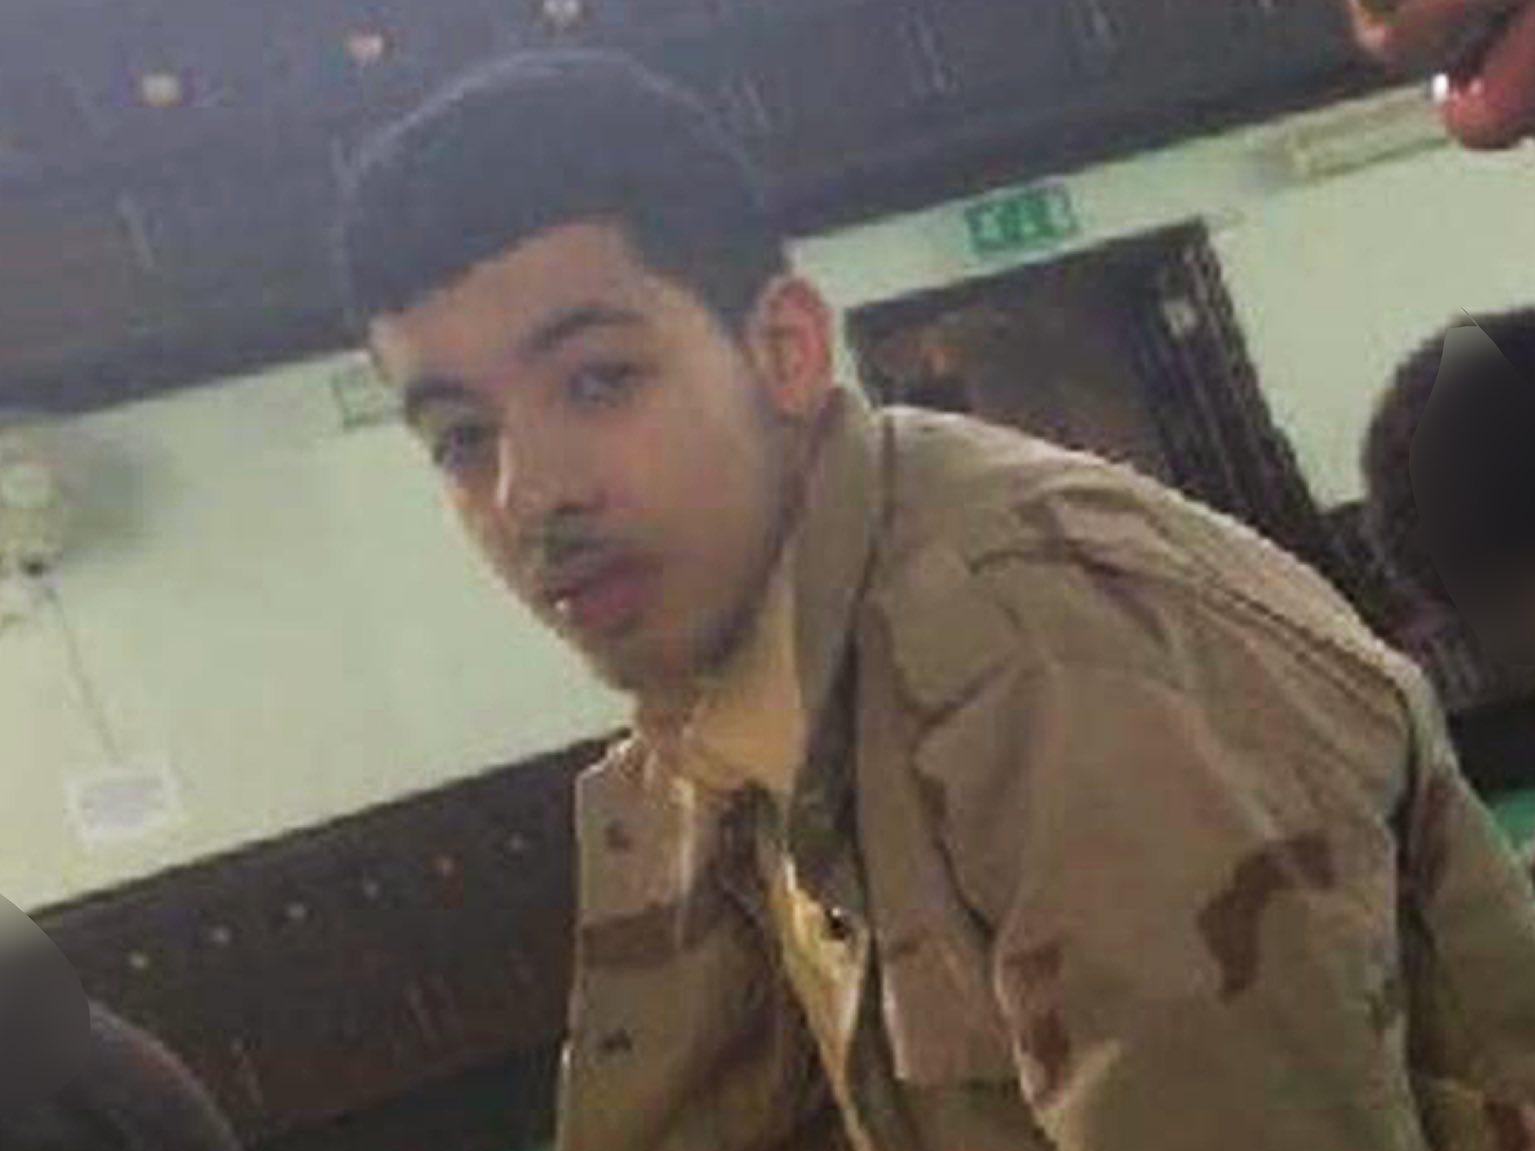 Salman Abedi killed 22 people when he bombed an Ariana Grande concert in Manchester